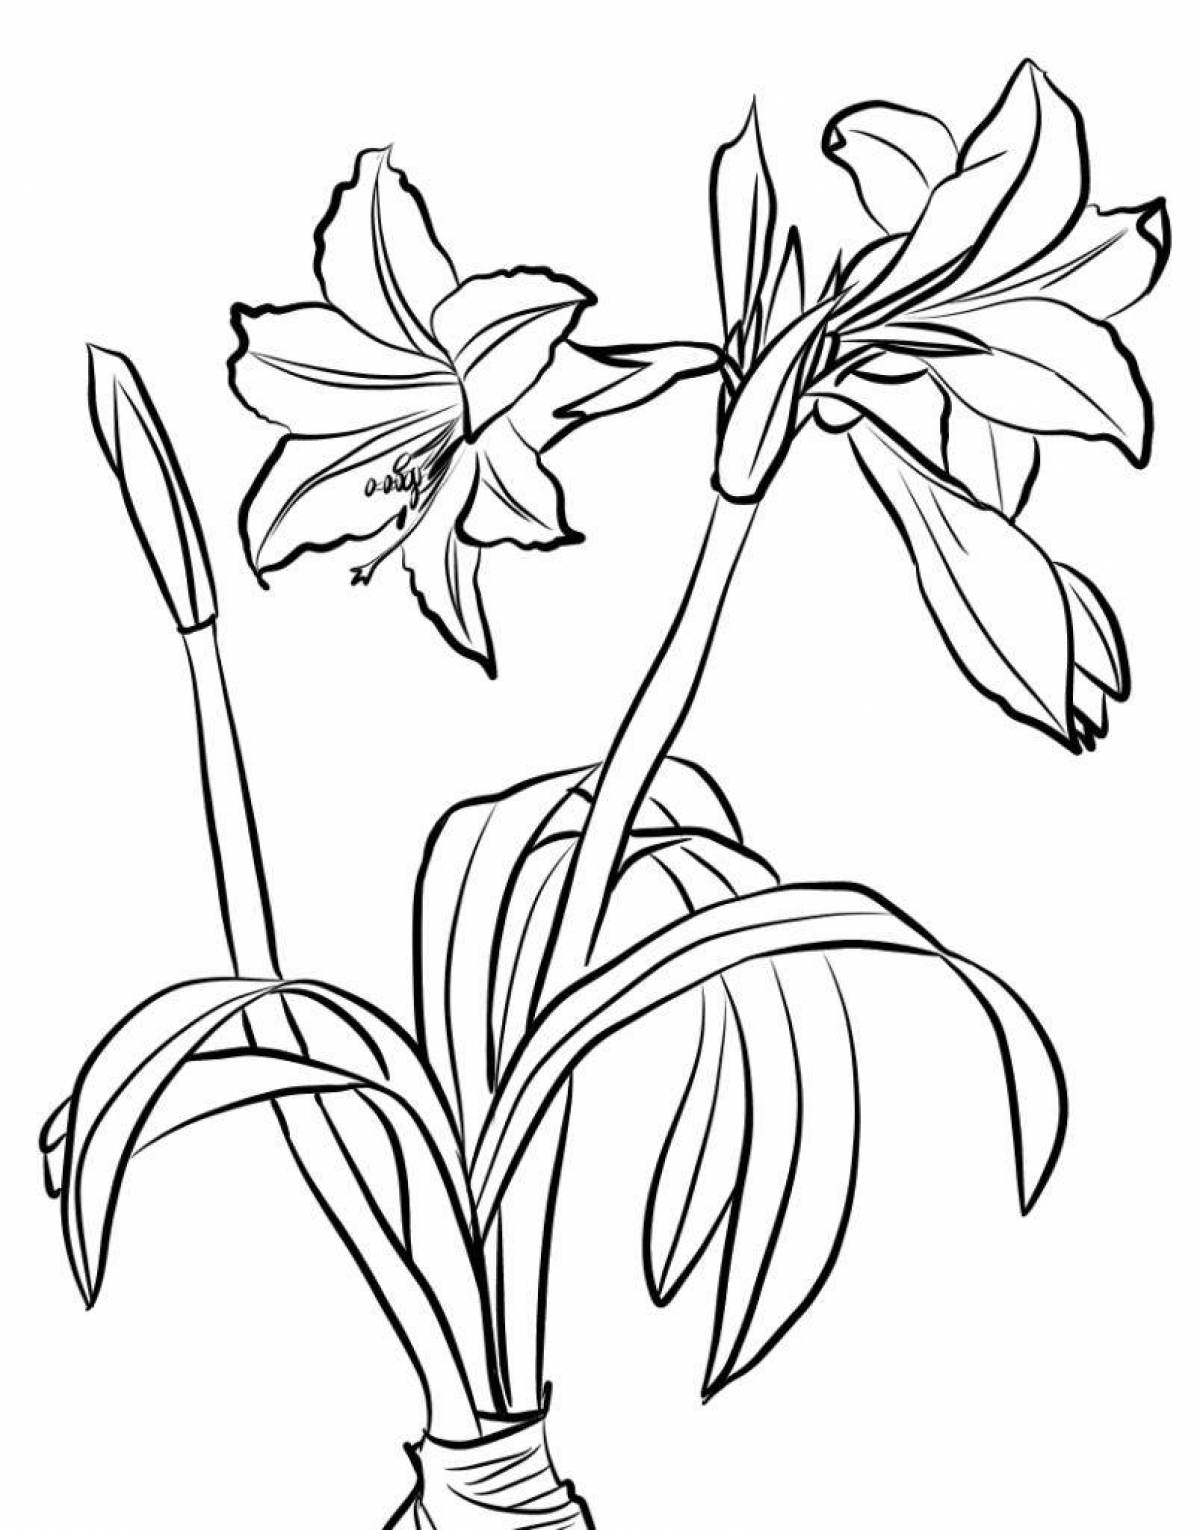 Luminous flower coloring pages